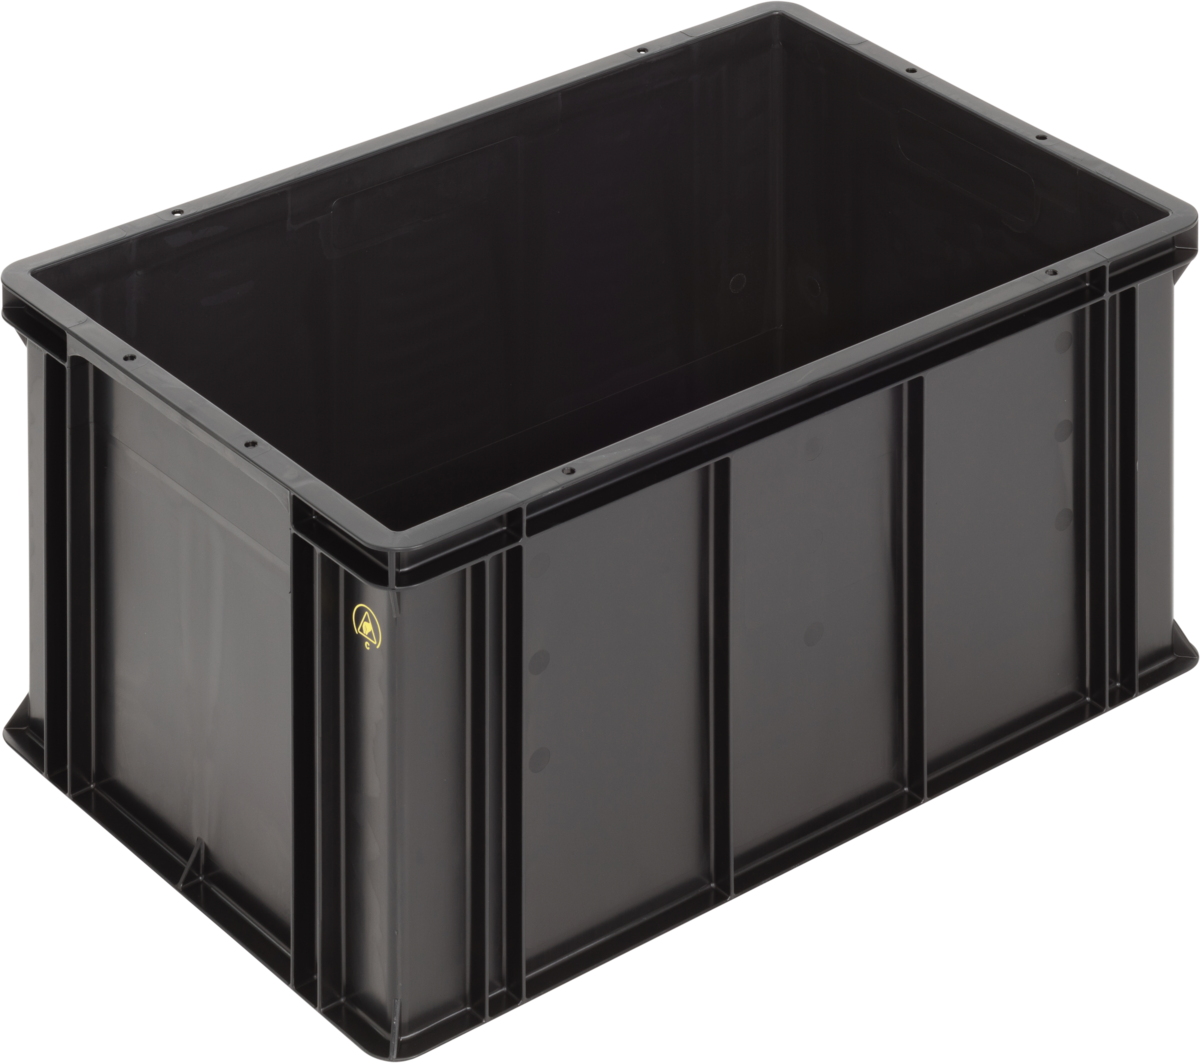 Anti-Static-ESD-Antistatic-ESD-Safe-SGL-Norm-Stacking-Bin-Containers-Flat-Base-Ref.-6432.007.992_1004519_600x400x320_01